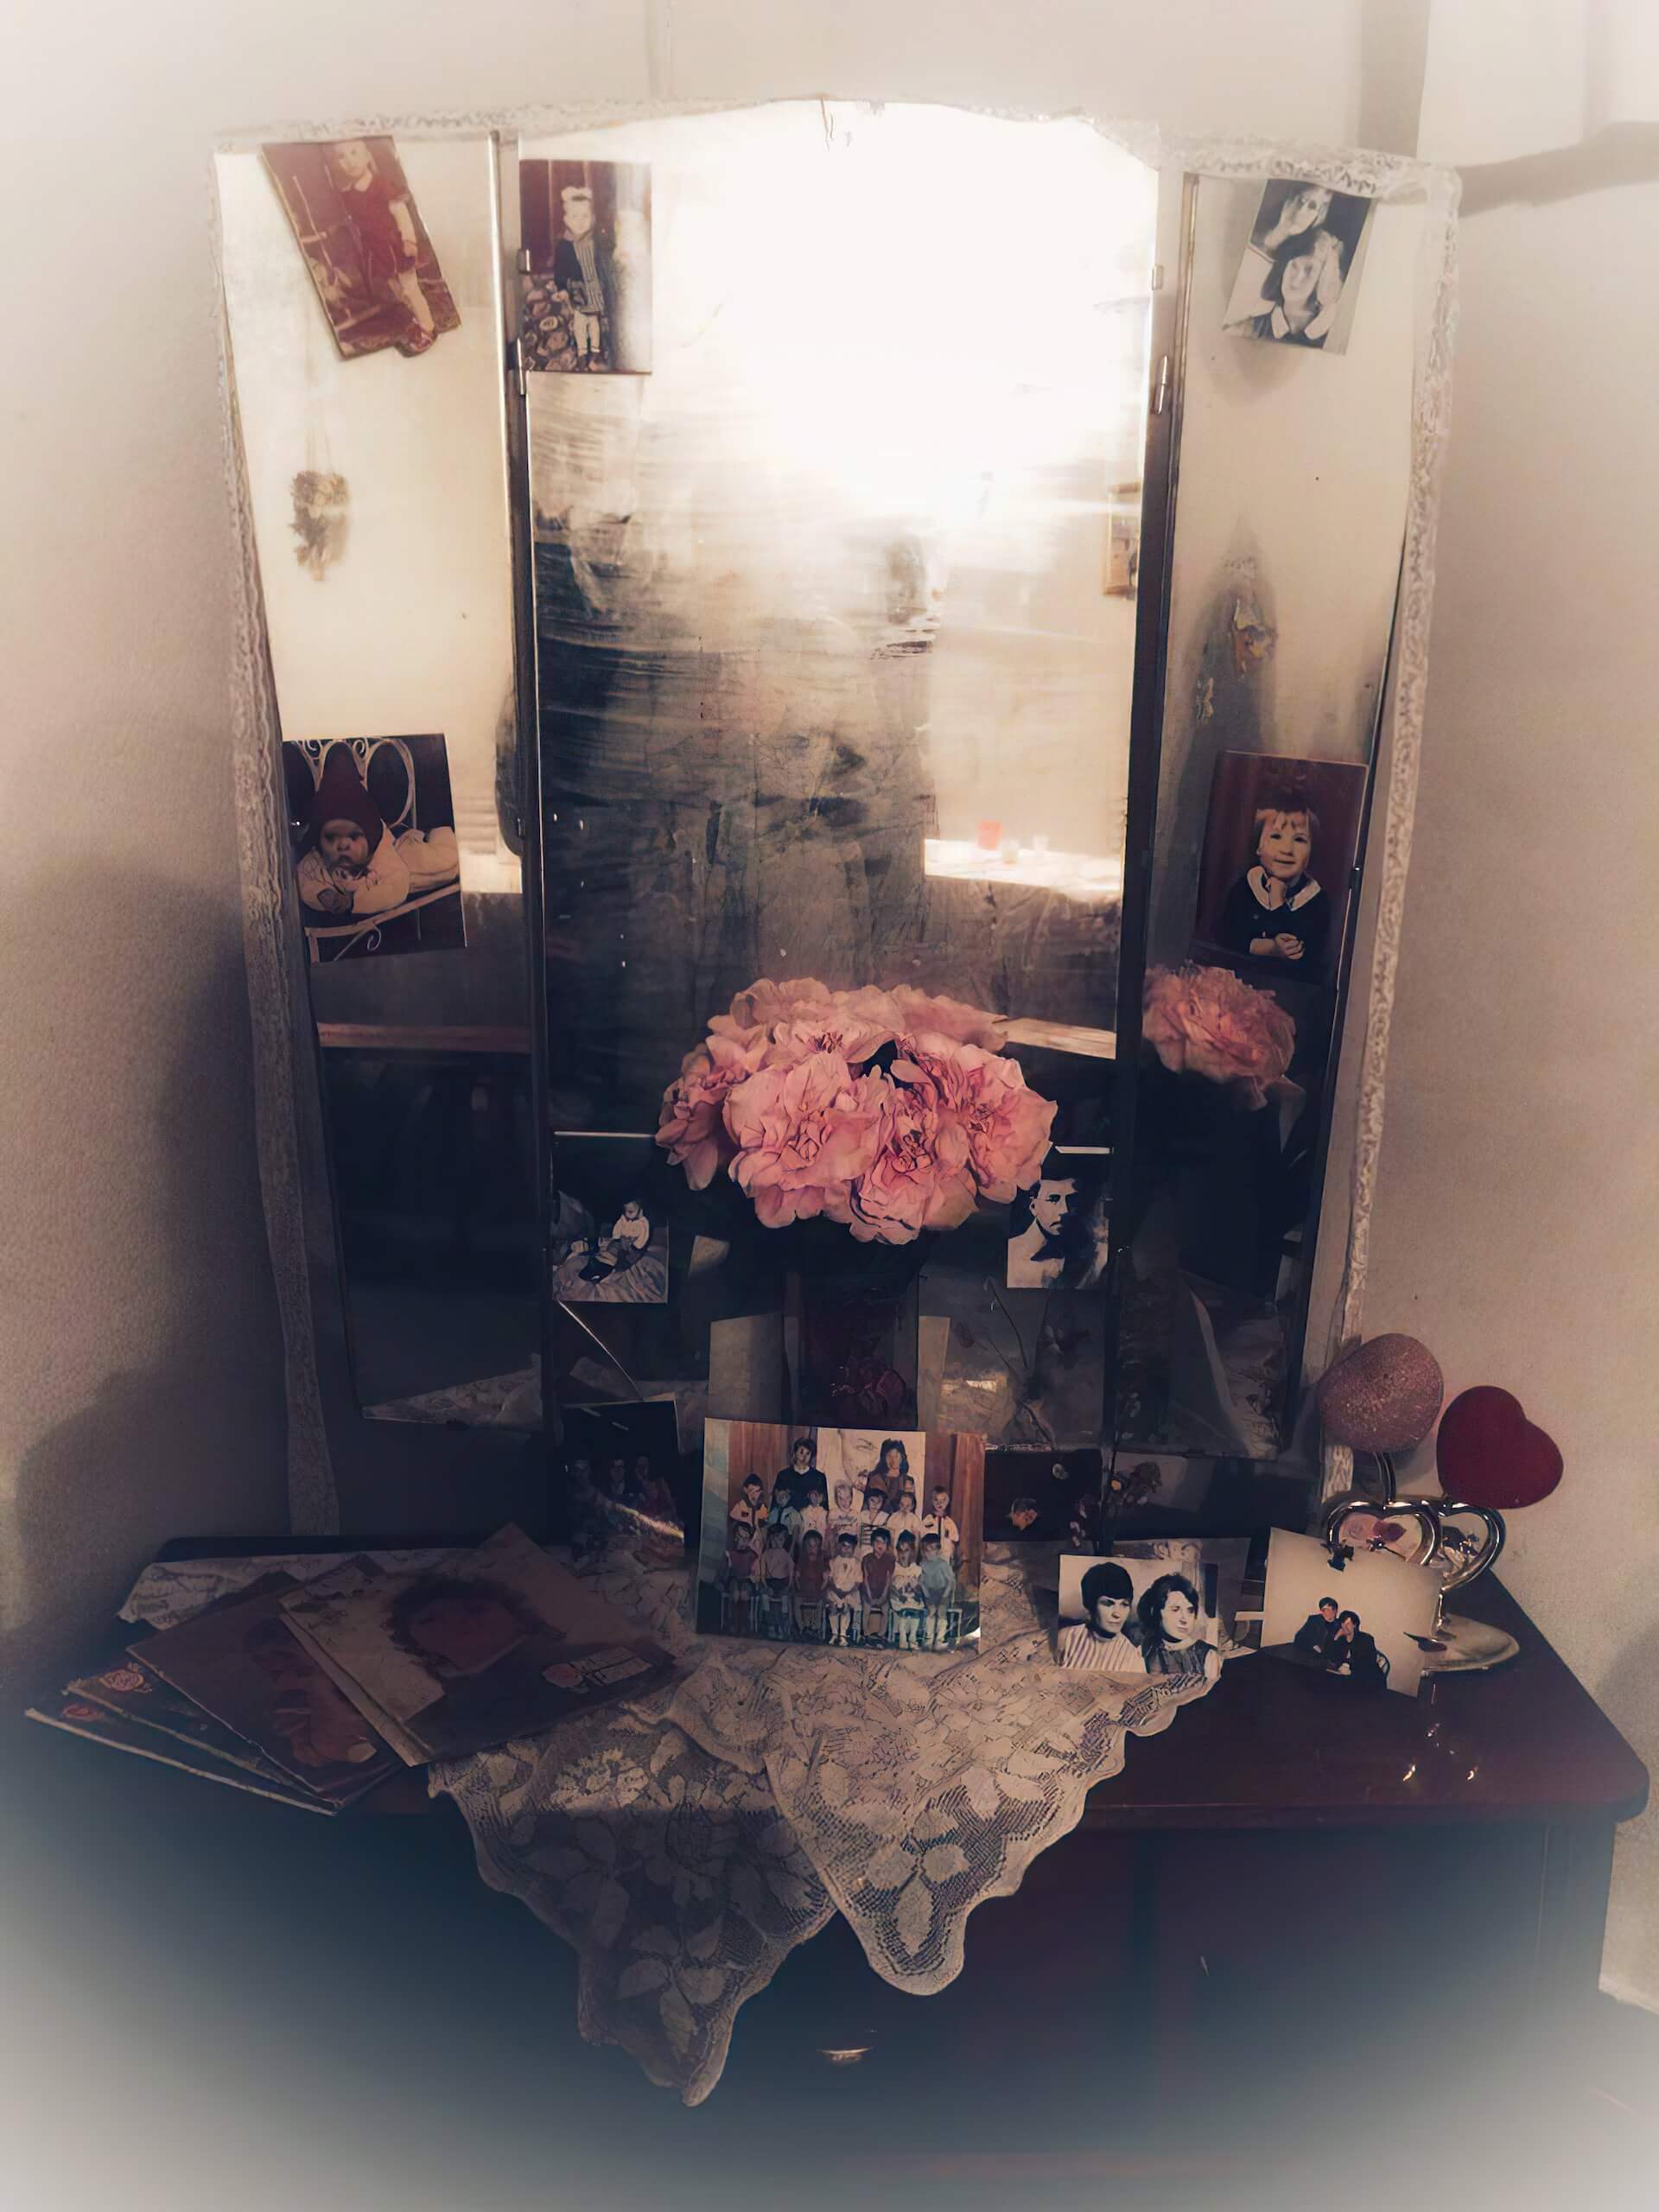 Three sided mirror stands on top of a dressing table. There are some photos of young children on the mirror. There is a glass vase with pink roses in the middle of the dressing table. The edges are blurred out to create a nostalgic atmosphere